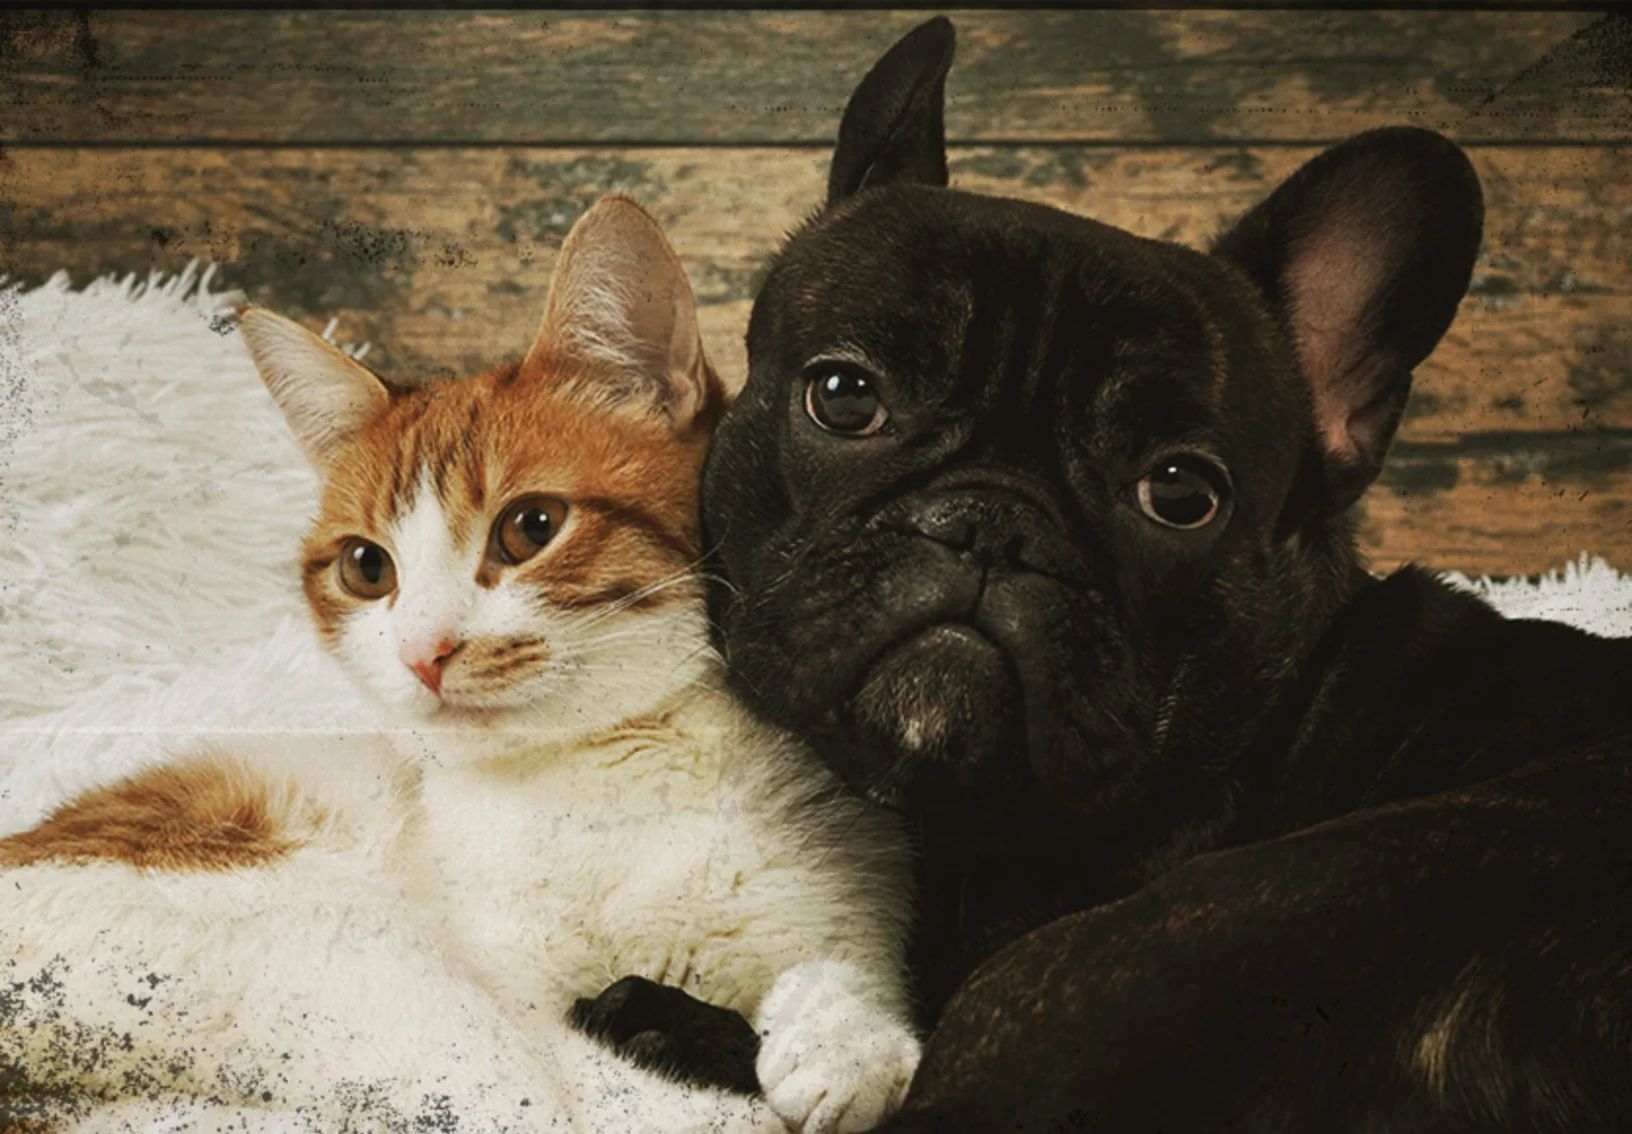 Dog and cat laying together with vintage photo filter